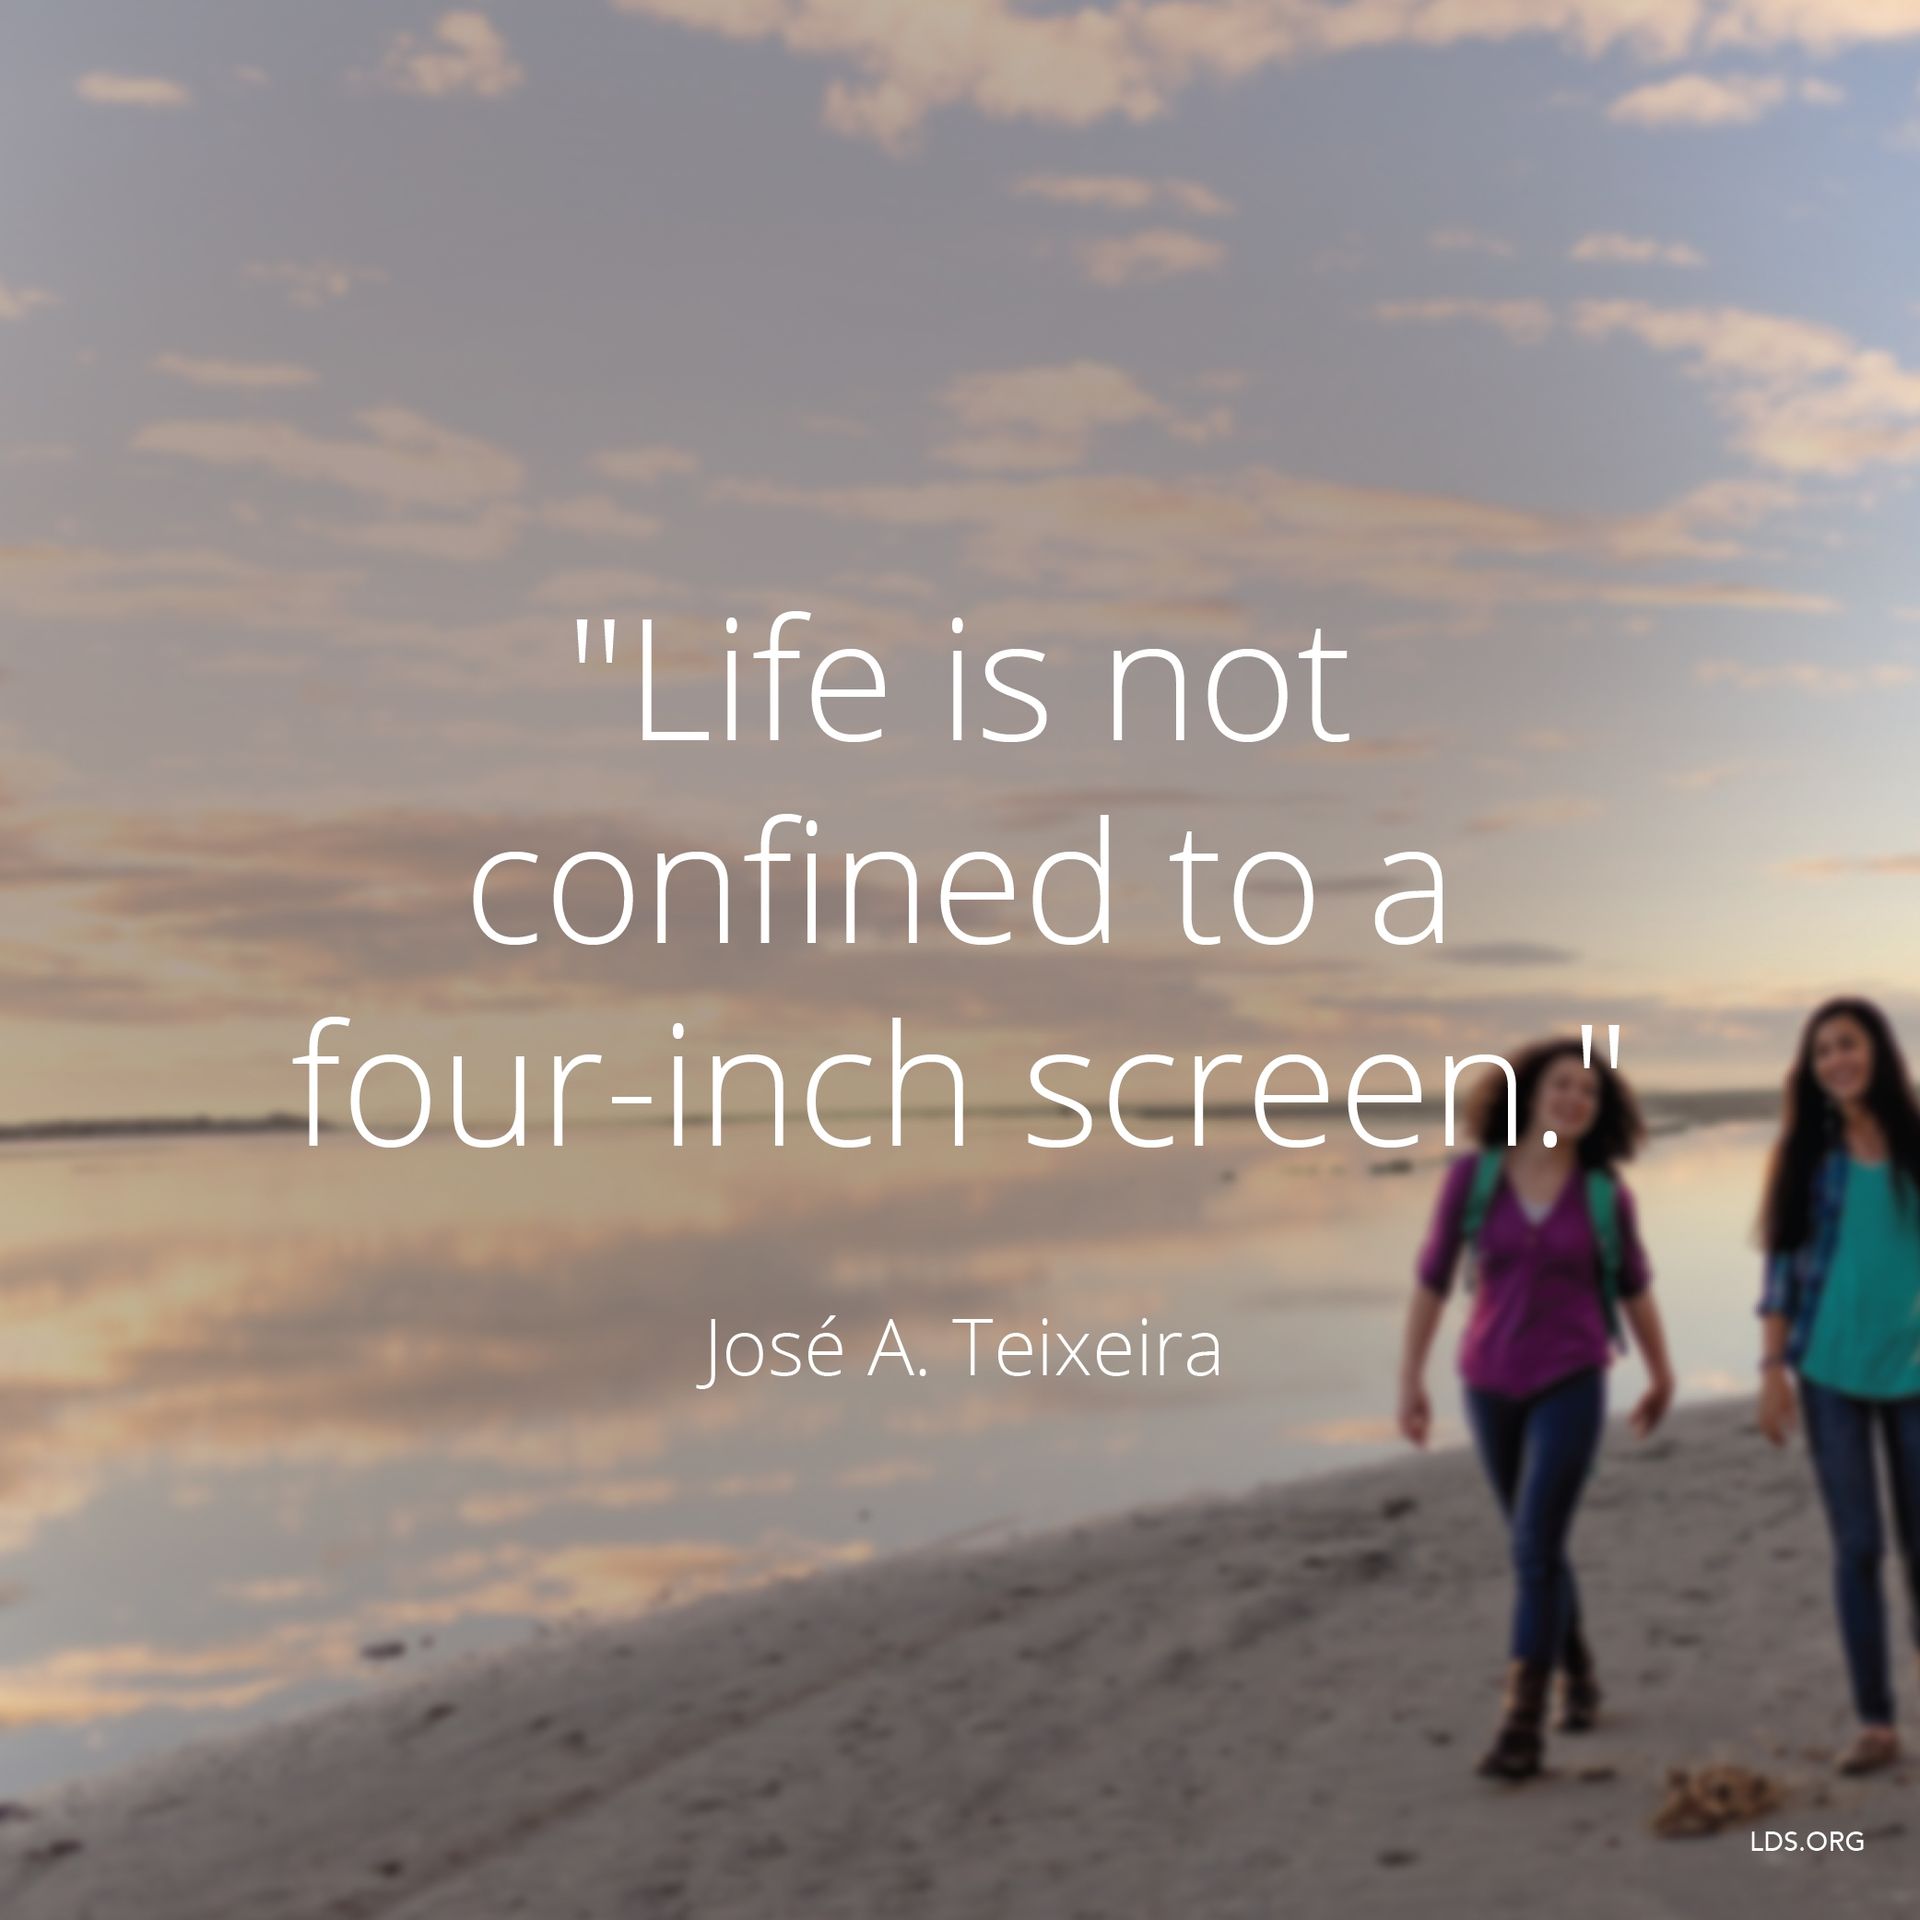 “Life is not confined to a four-inch screen.”—Elder José A. Teixeira, “Seeking the Lord” © undefined ipCode 1.